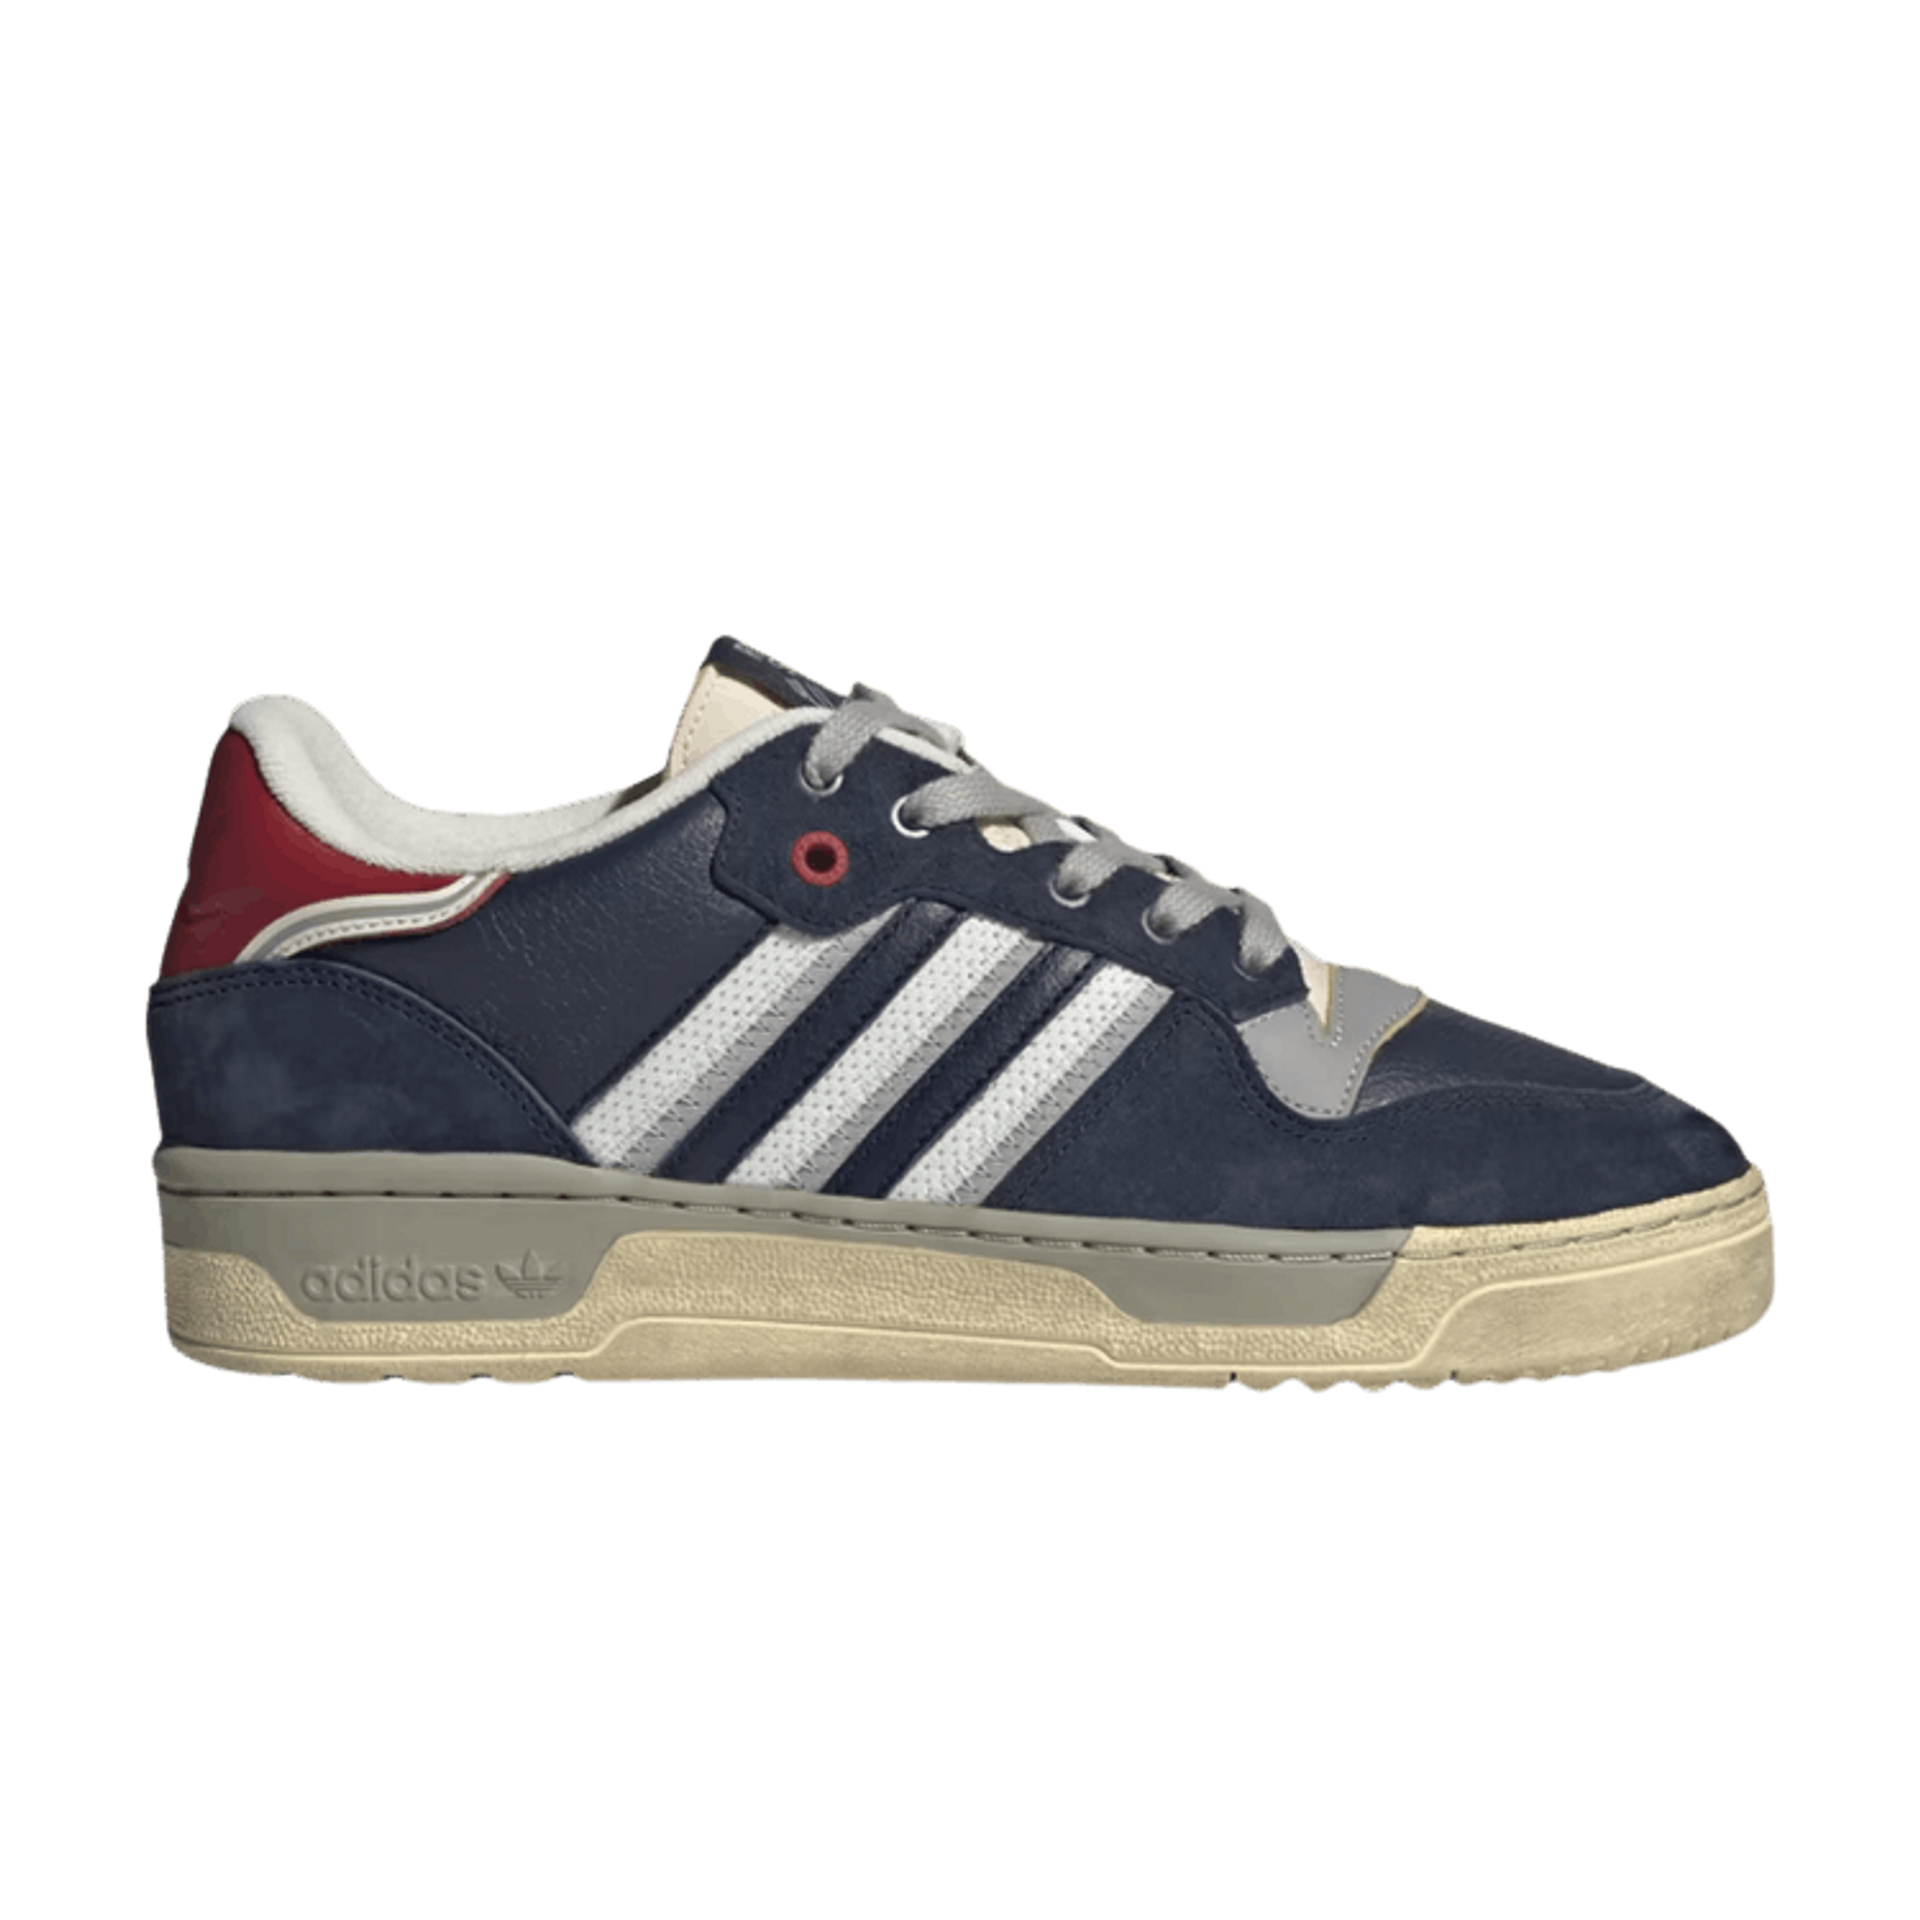 Extra Butter x adidas Rivalry Low 'Rivalry Series - Navy'